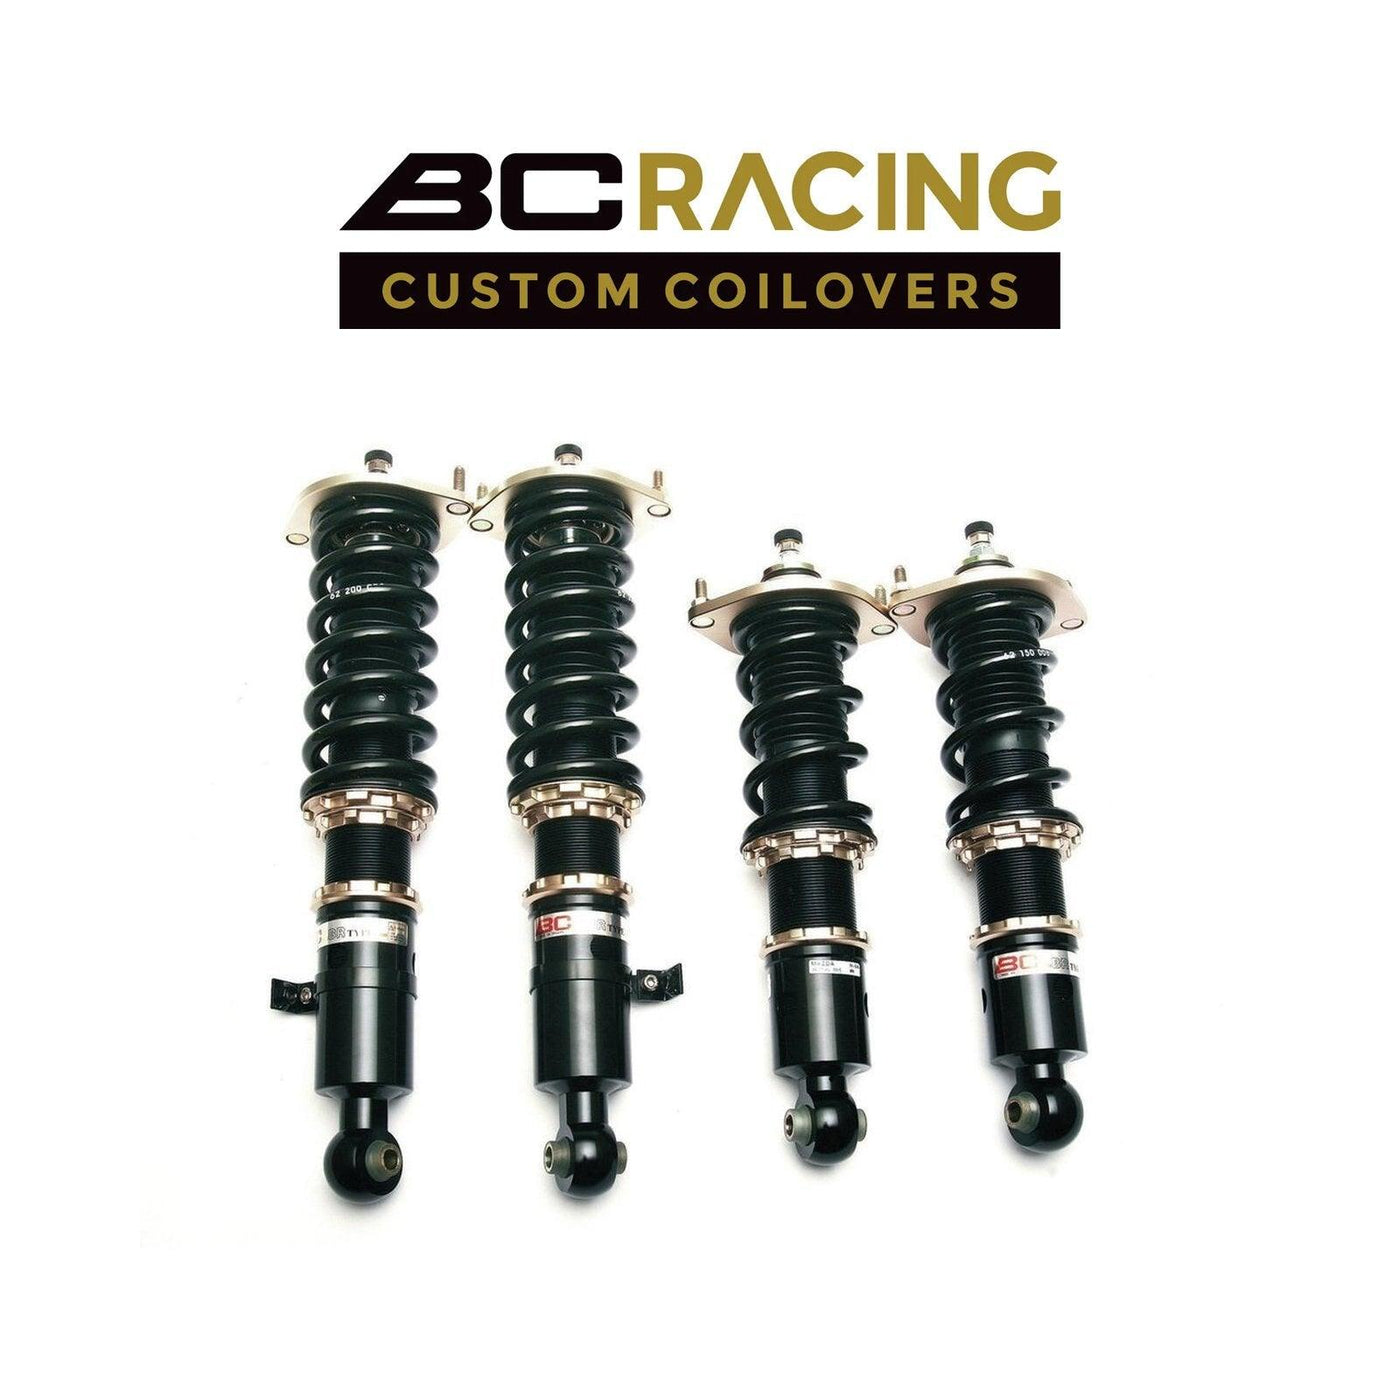 BC Racing Coilovers 2010-2012 LEXUS HS 200h - Attacking the Clock Racing